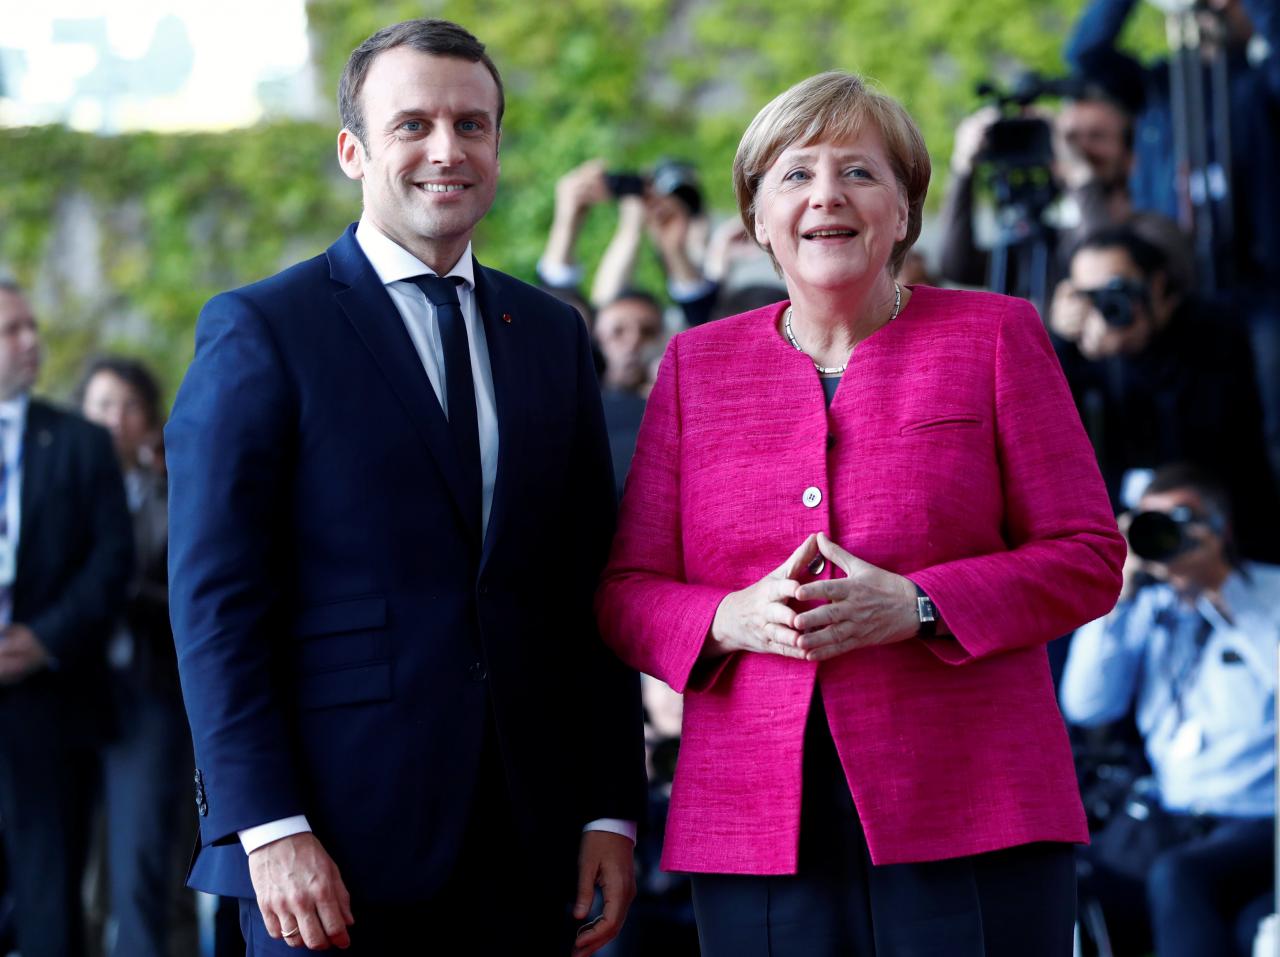 German Chancellor Angela Merkel and French President Emmanuel Macron arrive at a ceremony at the Chancellery in Berlin